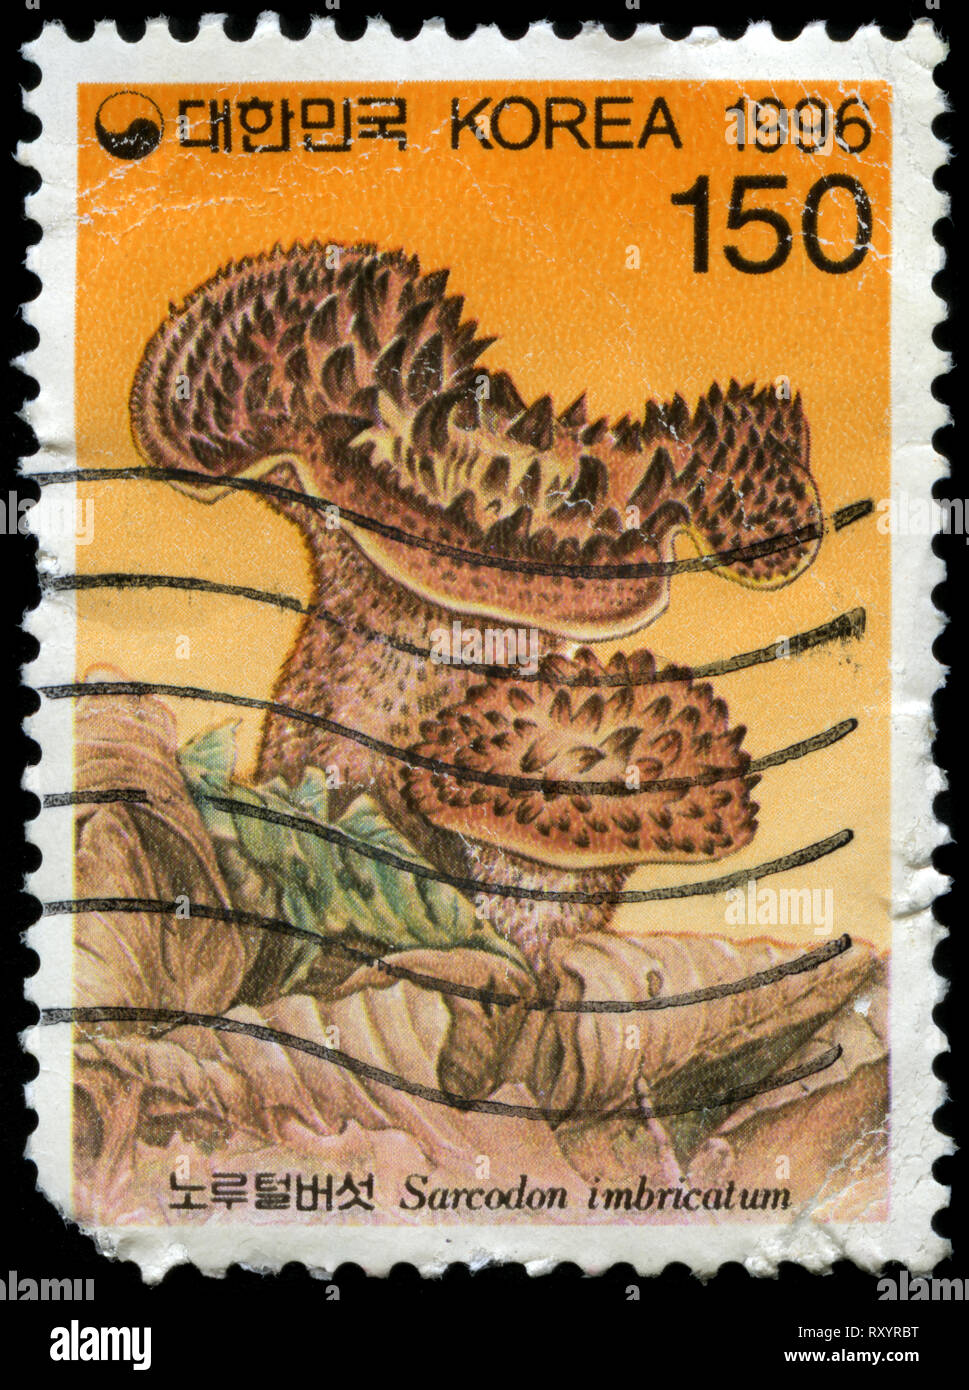 Postage stamp from South Korea in the Mushrooms series issued in 1996 Stock Photo